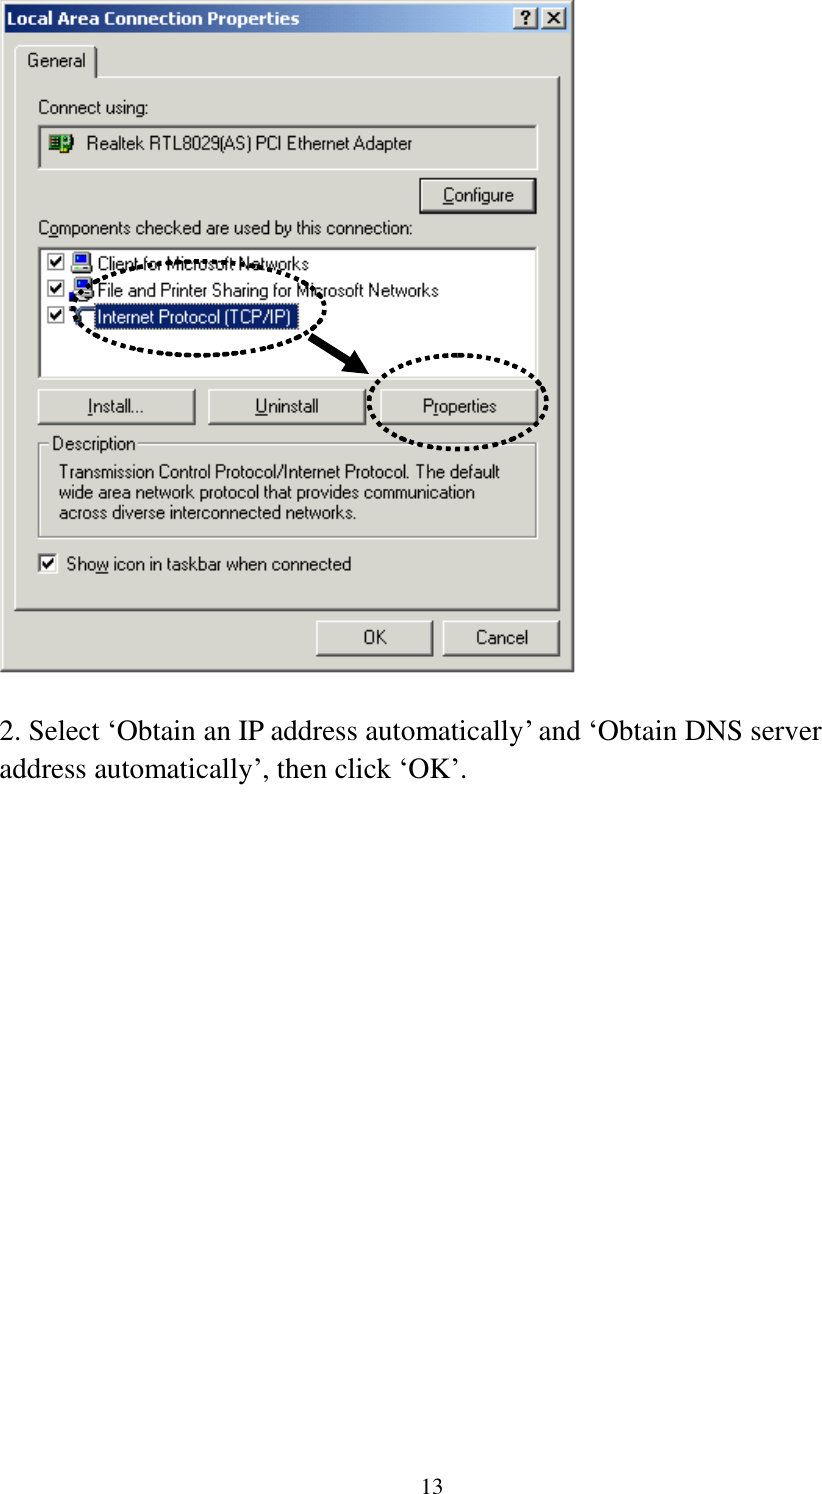 13   2. Select „Obtain an IP address automatically‟ and „Obtain DNS server address automatically‟, then click „OK‟.  